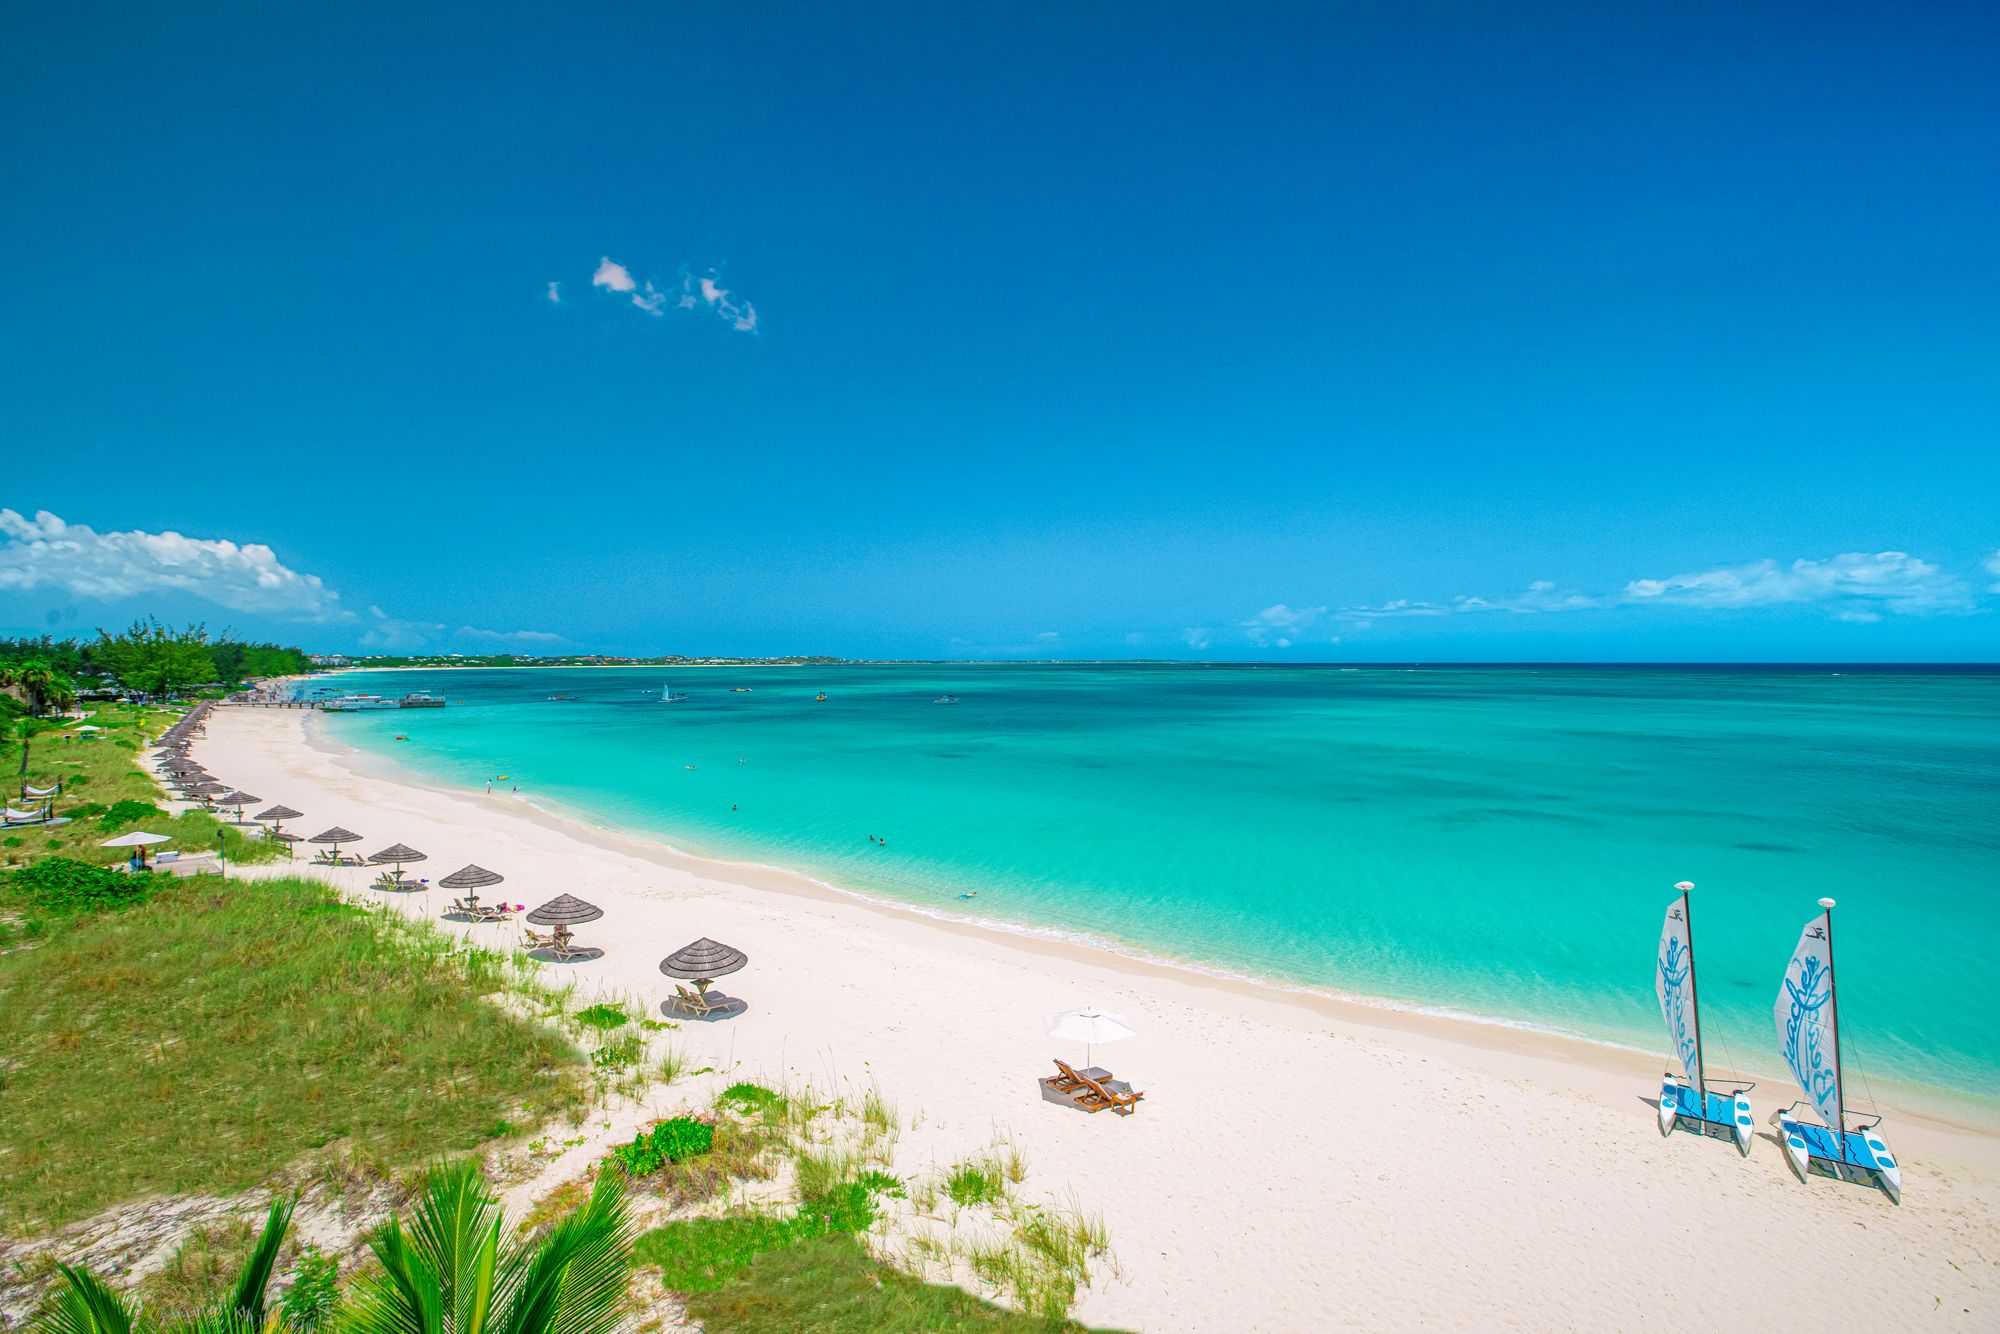 Best Beaches In The Turks And Caicos Islands - Bank2home.com